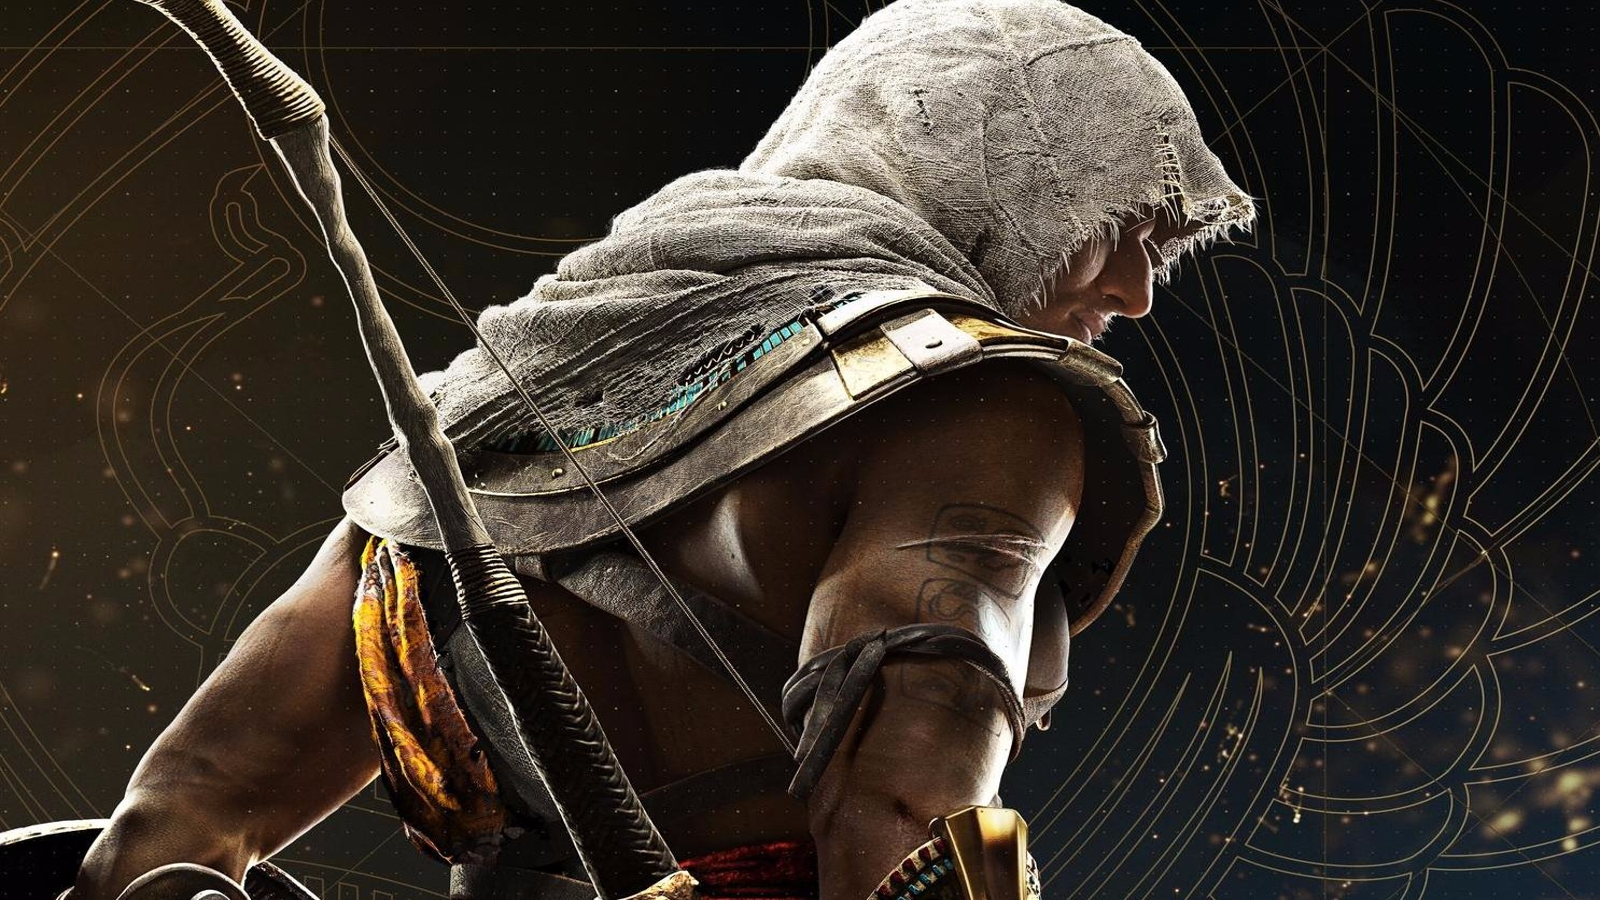 Assassin's Creed: Origins is single-player only